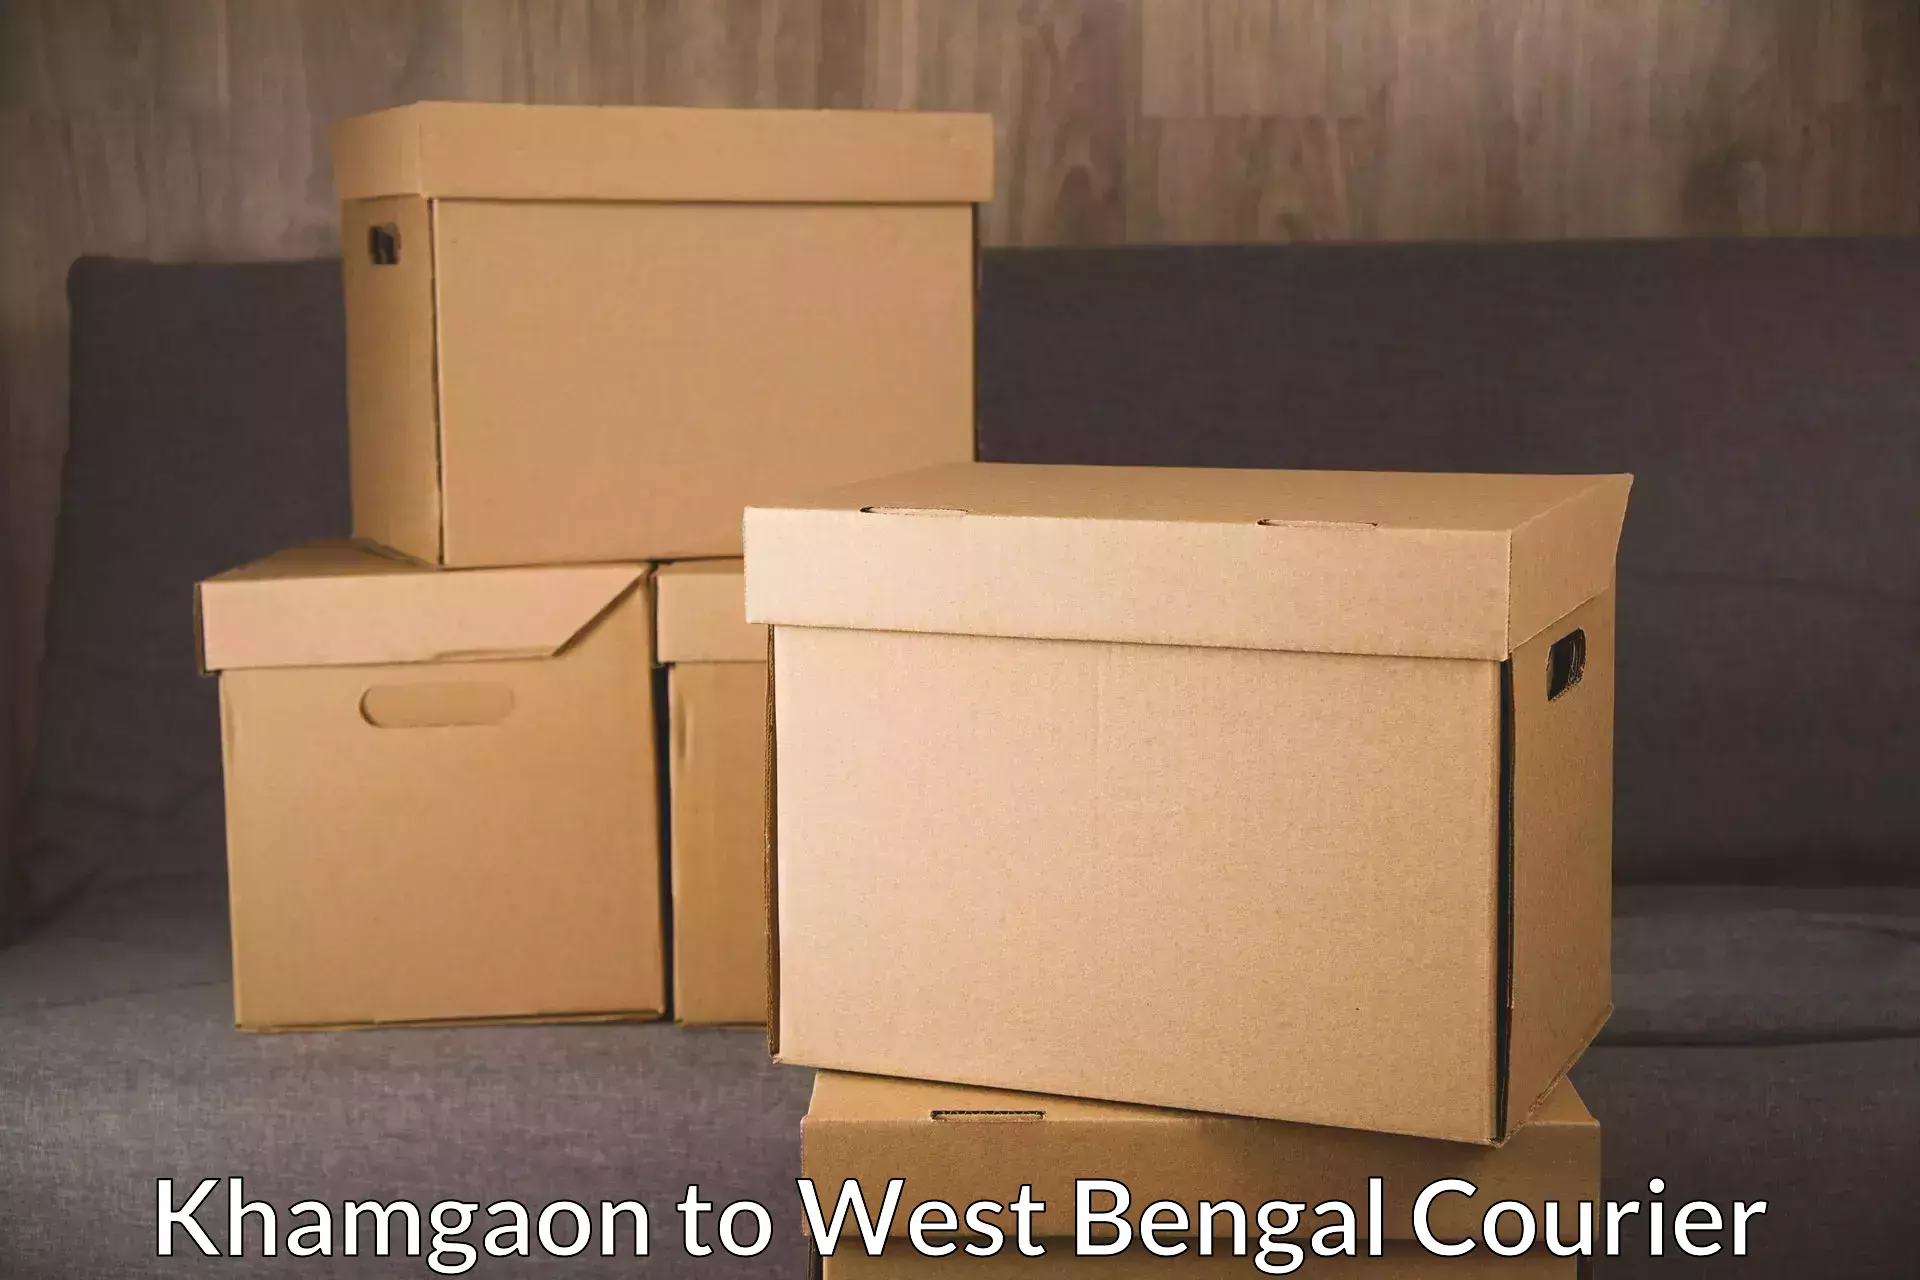 Courier service innovation in Khamgaon to Purulia